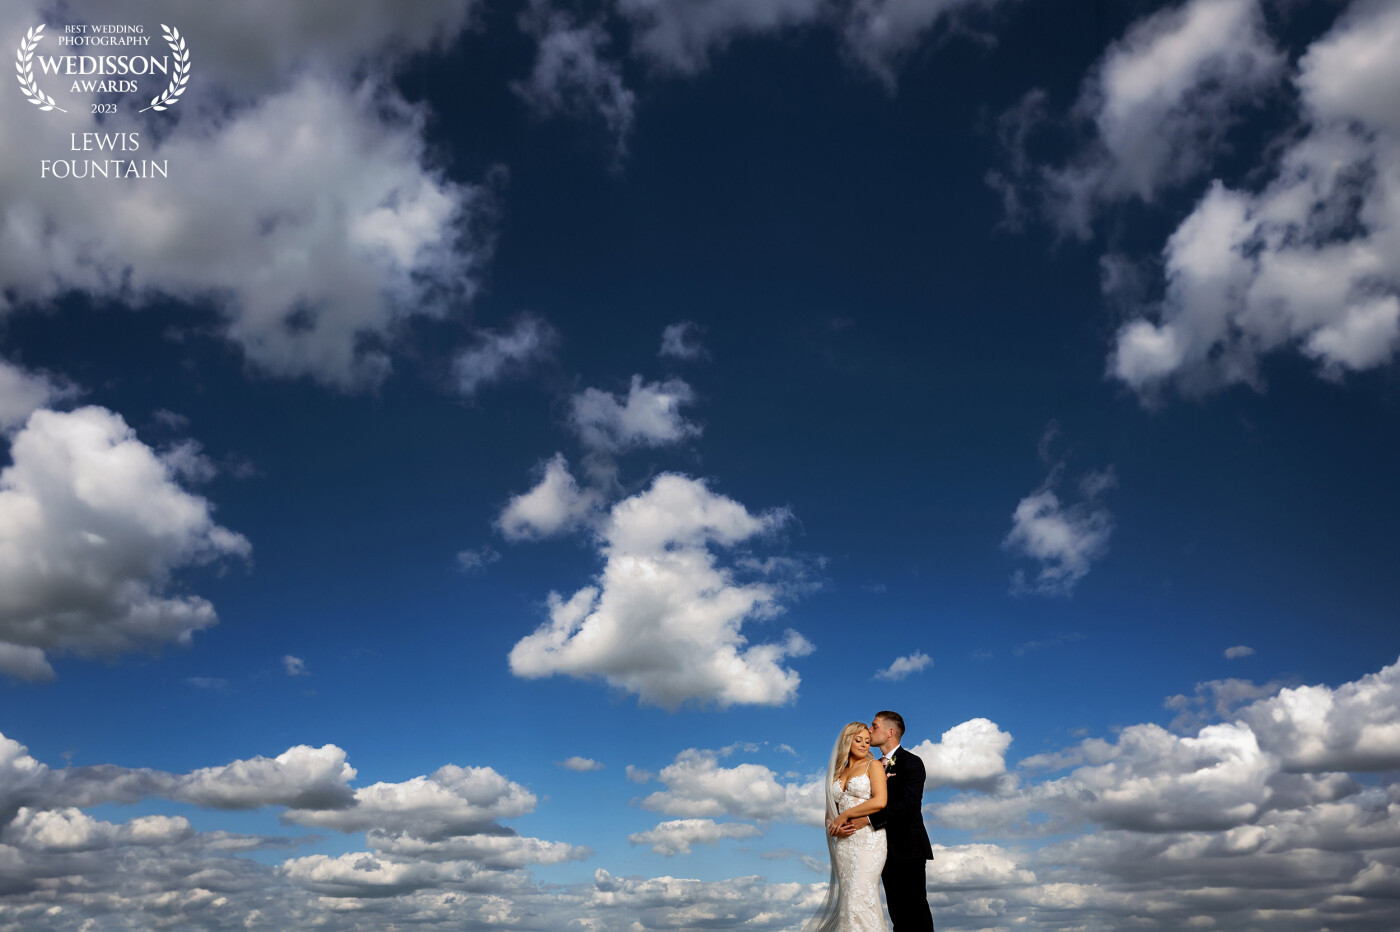 The perspective of the clouds to the bride & groom was what we loved when framing this shot. <br />
<br />
One of the couple’s favourites, and now one of ours